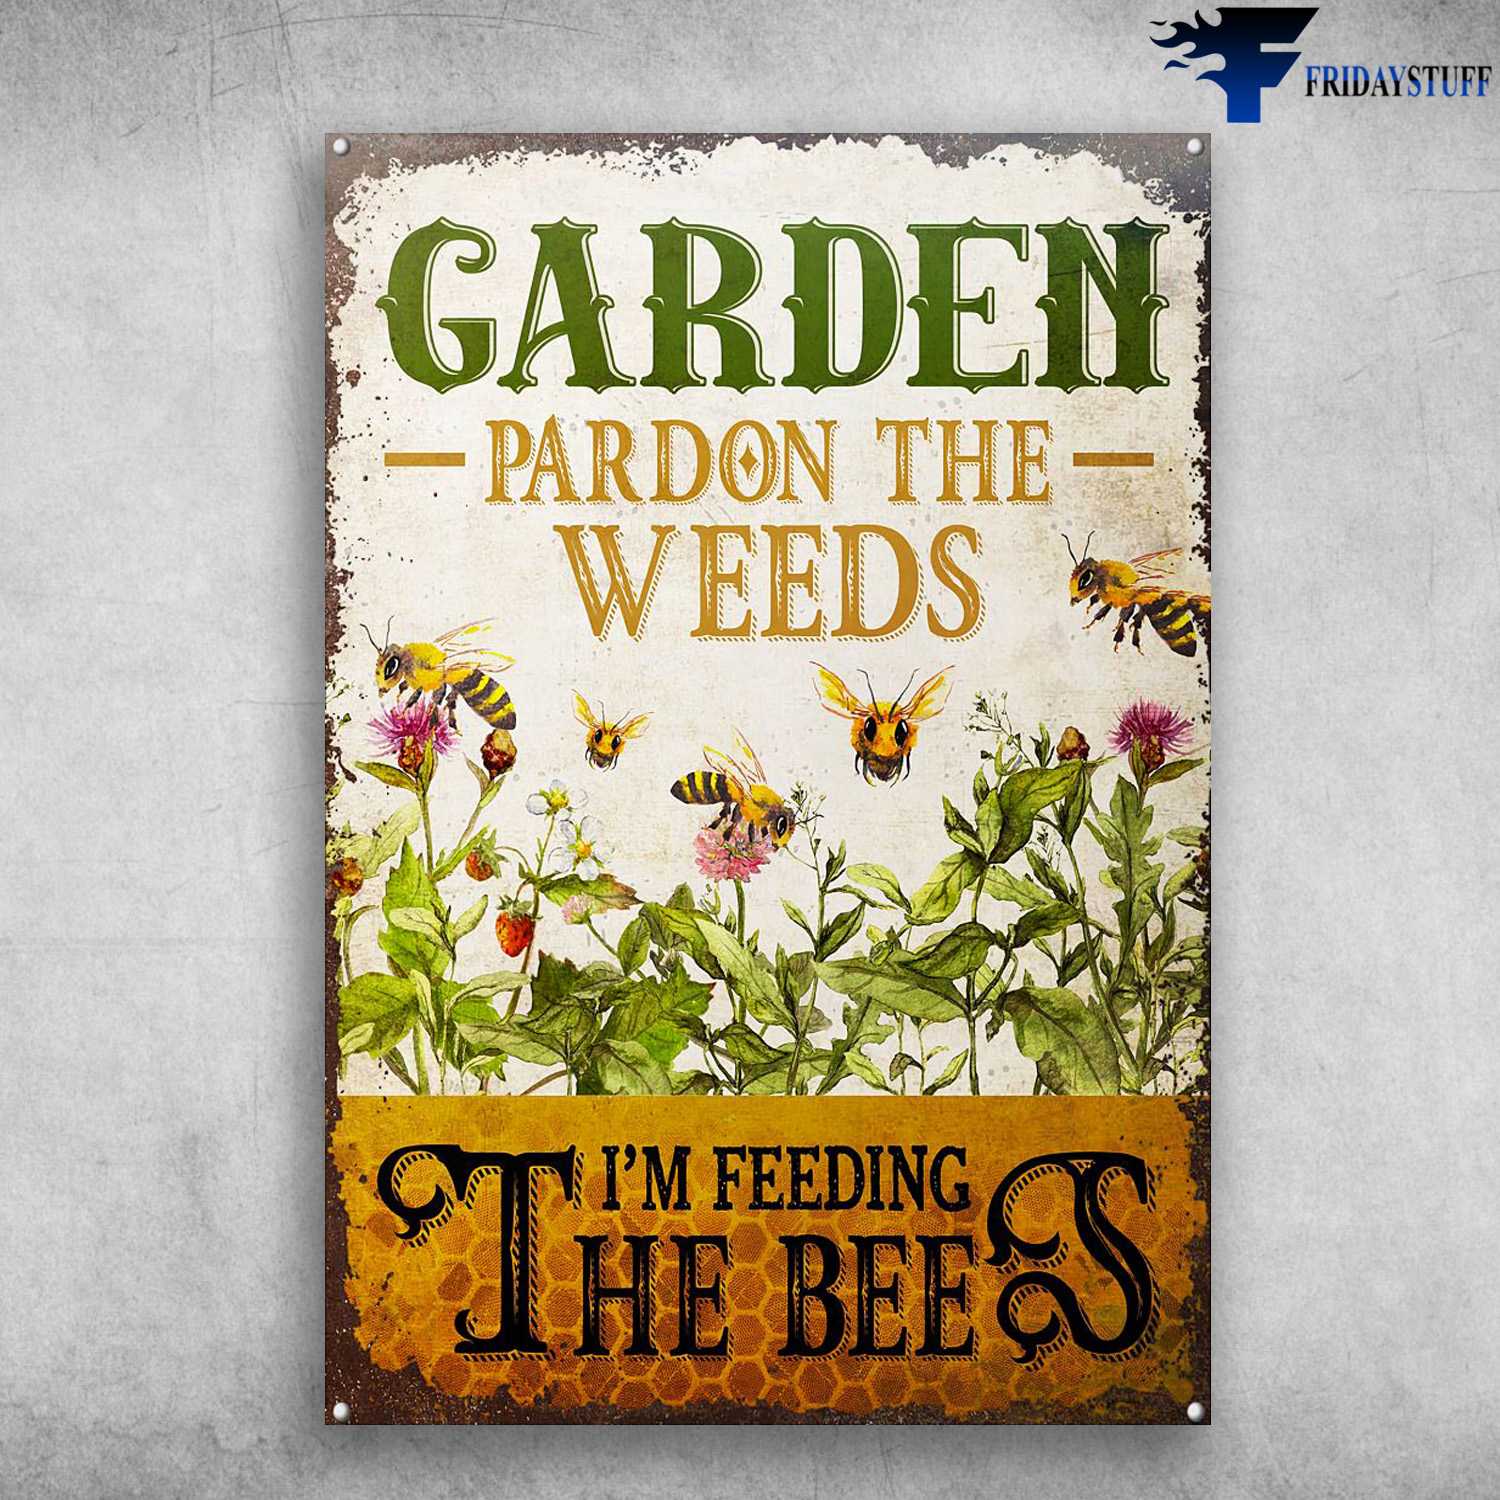 Bee Keeper, Bee Poster, Garden Pardon The Weeds, I'm Feeding The Bees